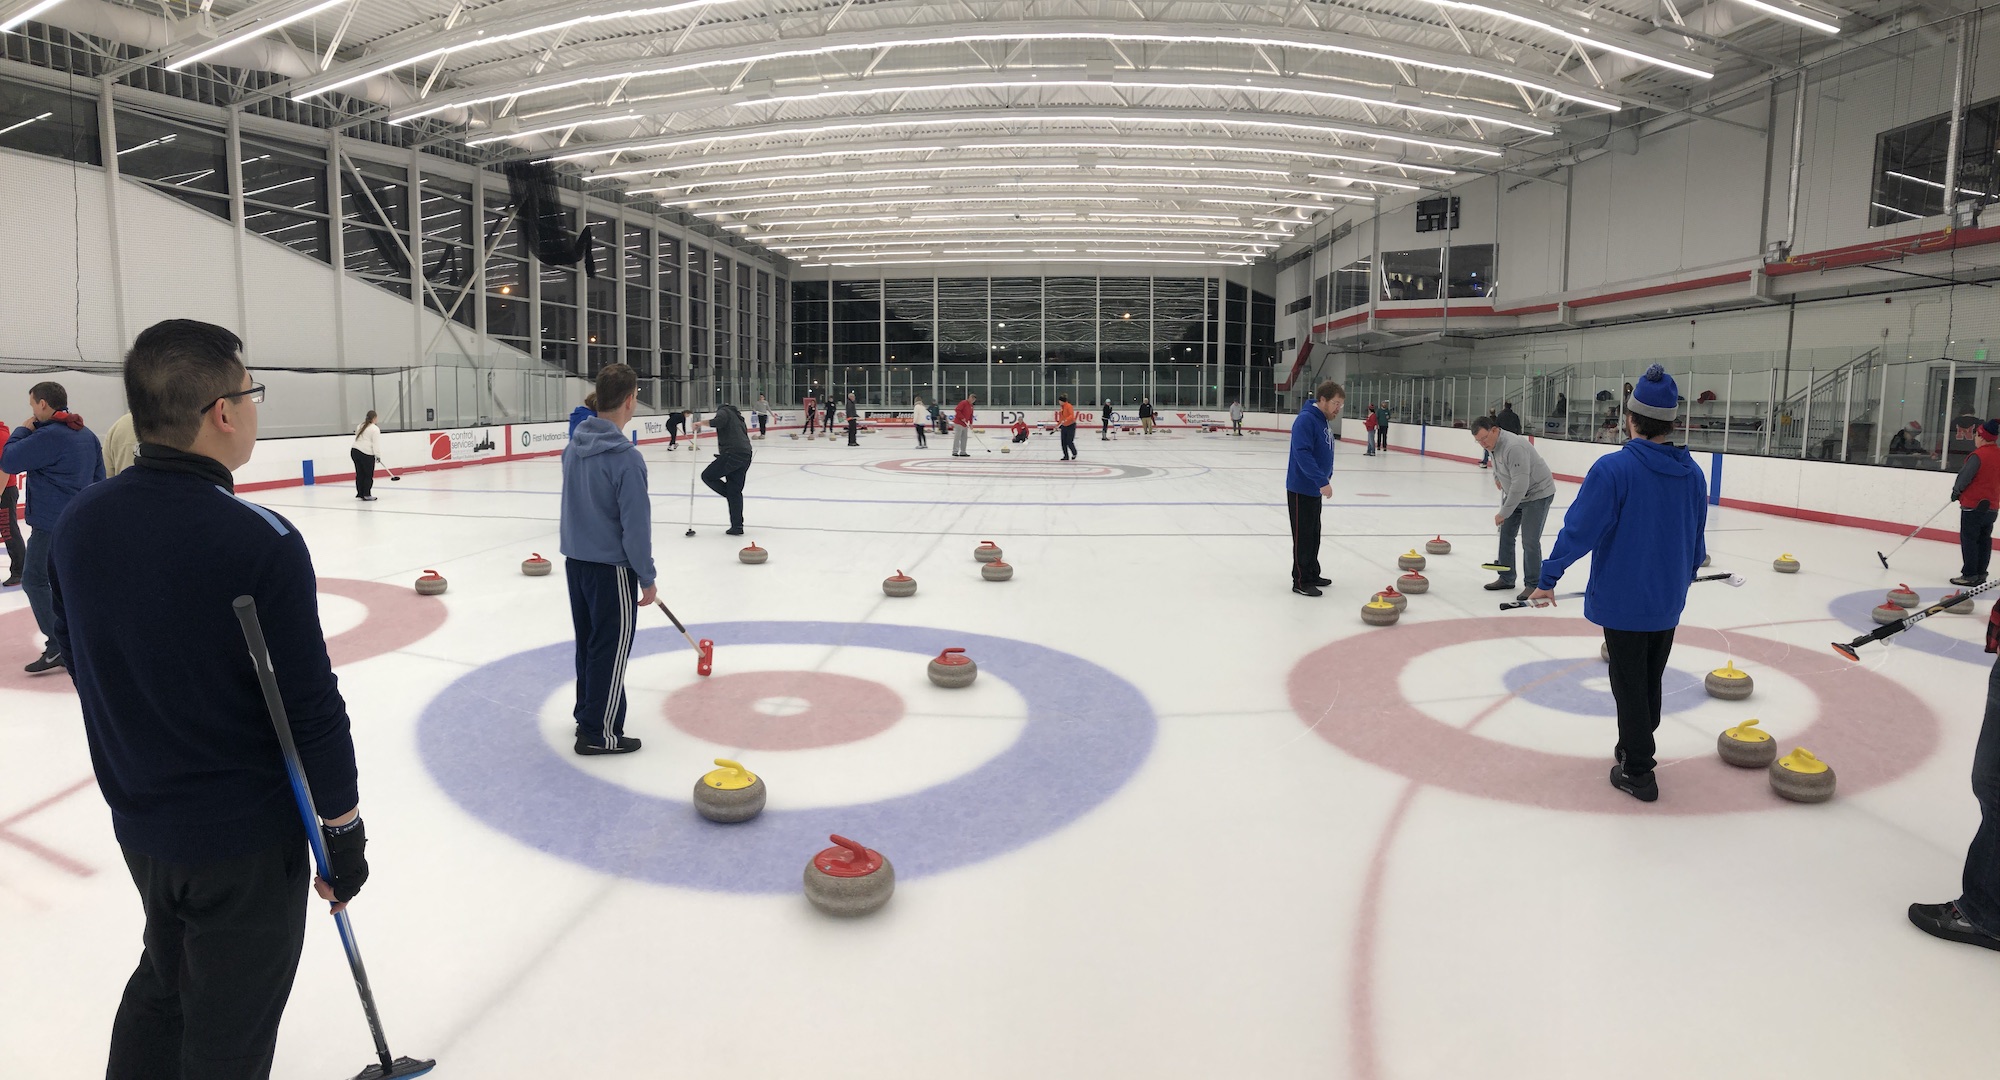 Practice Ice / Drop-in Curling - Wednesday, July 20, 2022 at 8:00pm